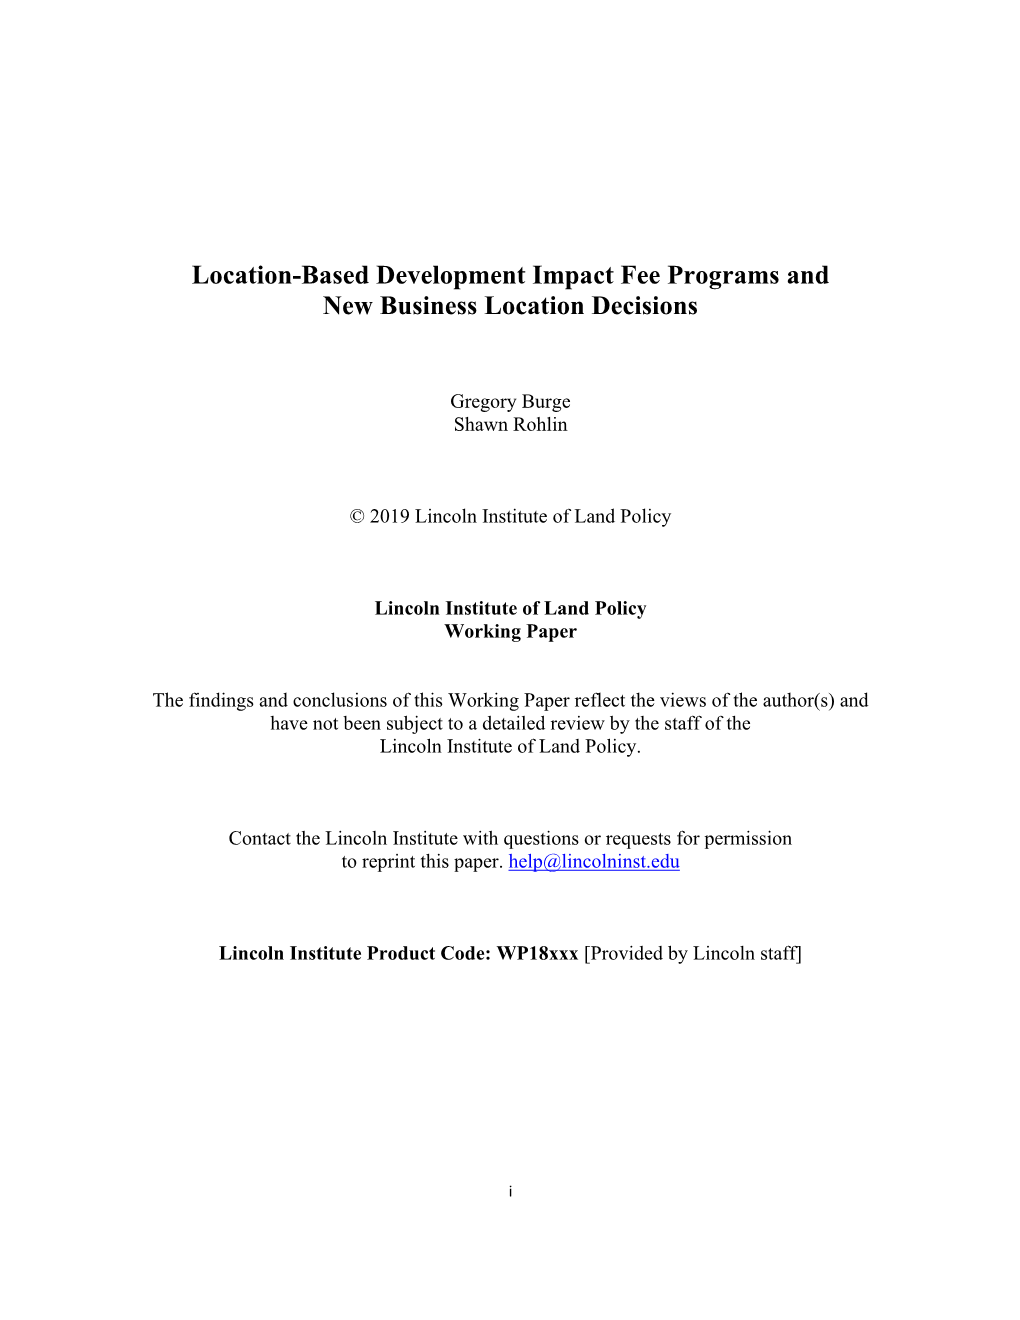 Location-Based Development Impact Fee Programs and New Business Location Decisions